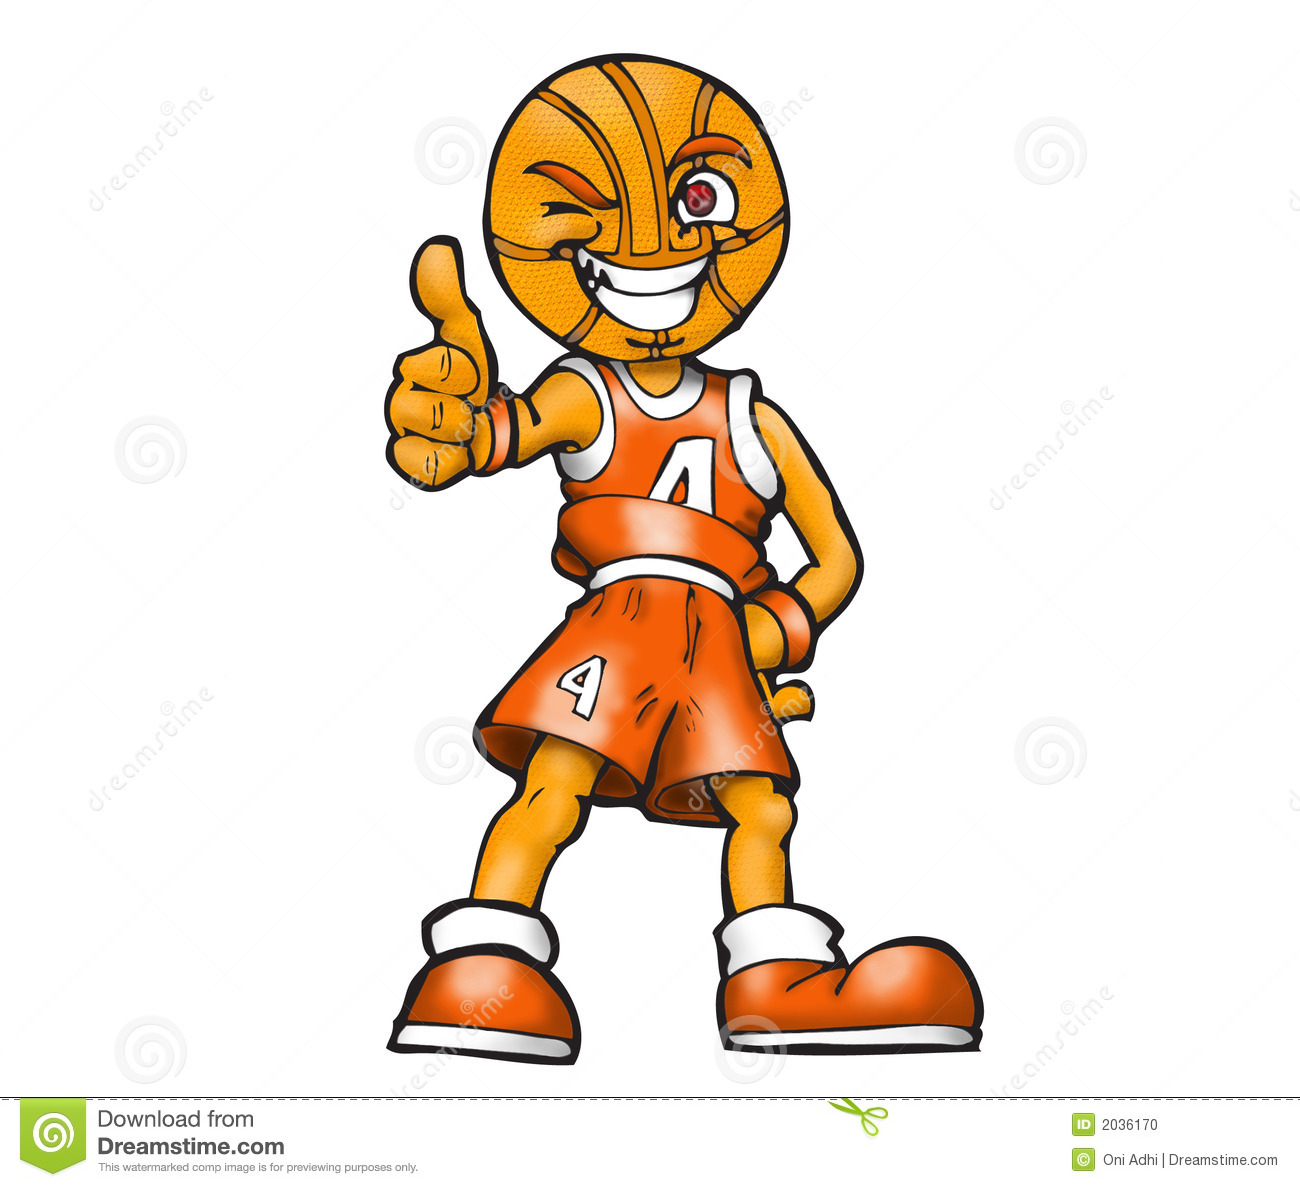 Cartoon Basketball Player  Mascot With Basketball Head And Thumbs Up